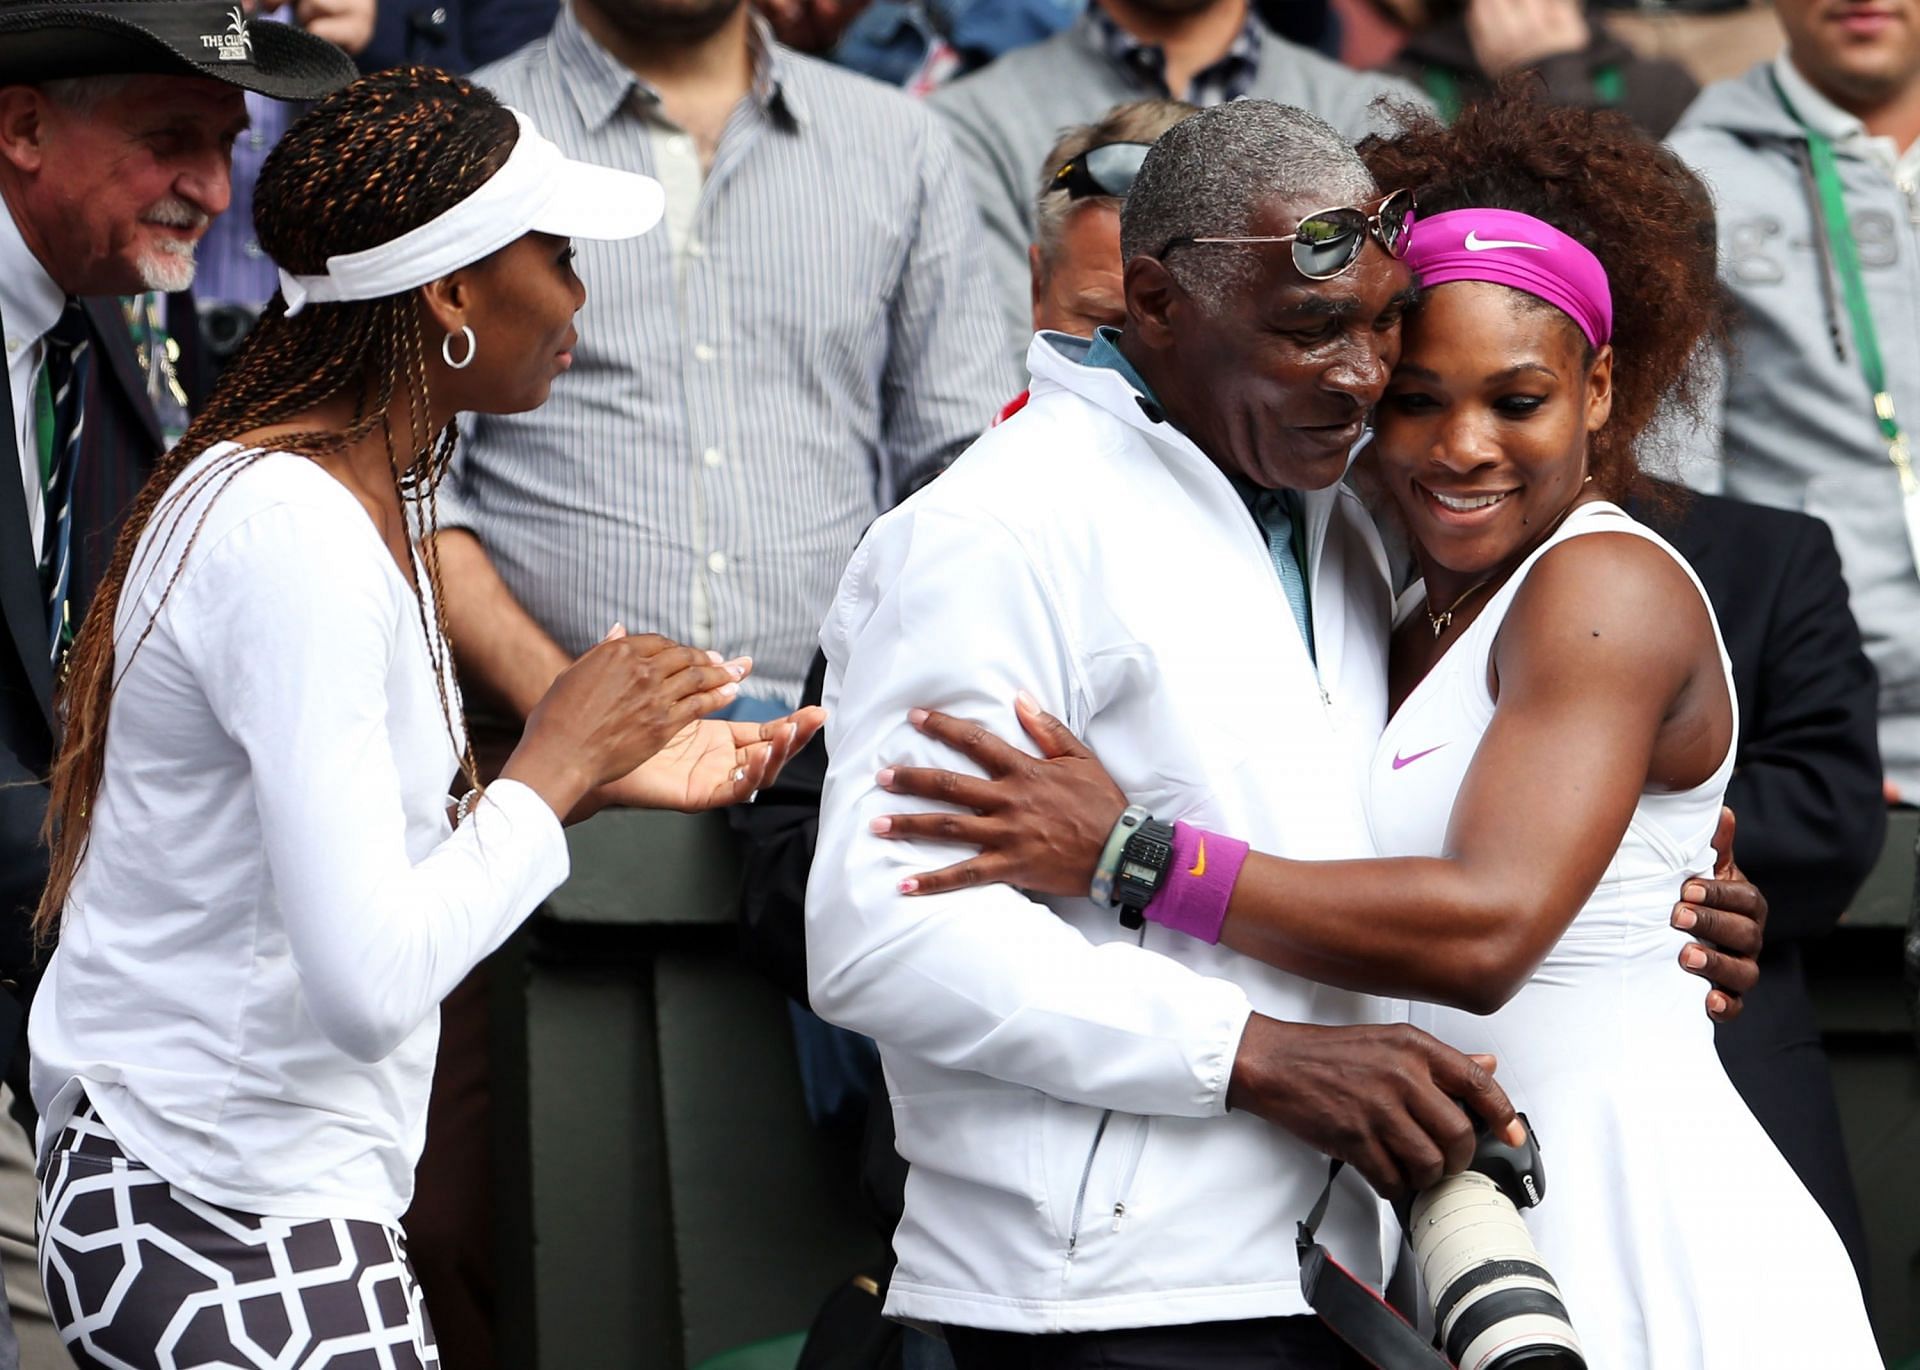 Serena Williams and Venus Williams embrace their father Richard